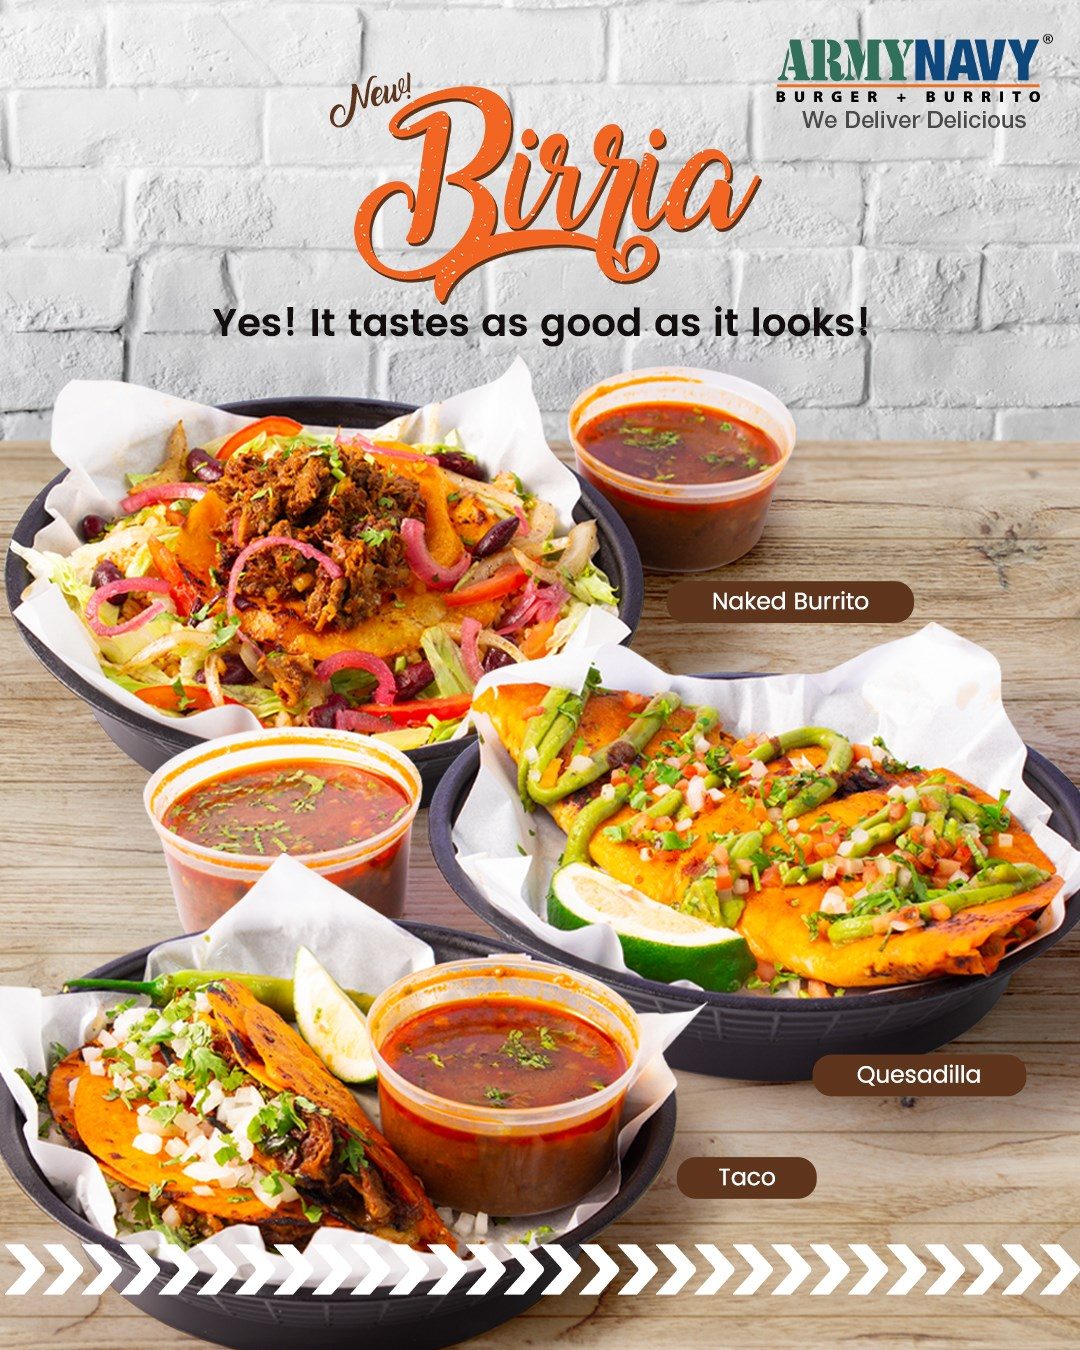 Army Navy launches new beef birria items